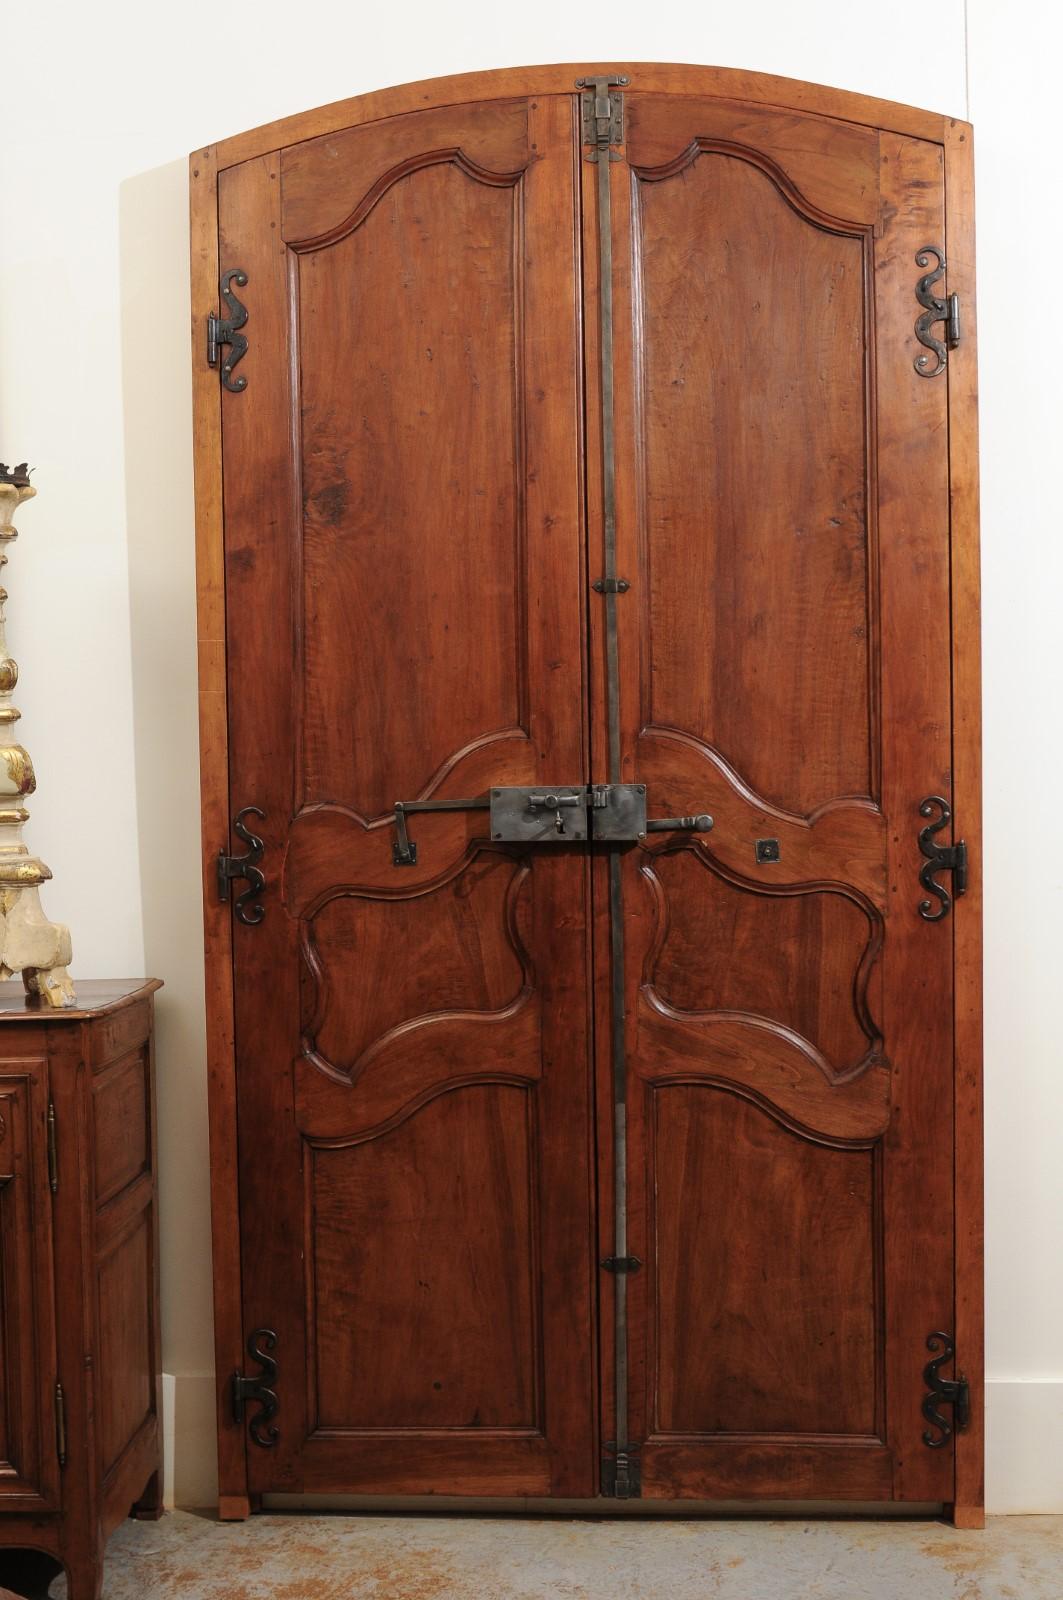 A pair of large scale French 19th century Louis XV style doors in alder wood, with custom-made door surrounds. We currently have a pair of doors available. This pair of French doors features an arched top, sitting above a pair of double doors,